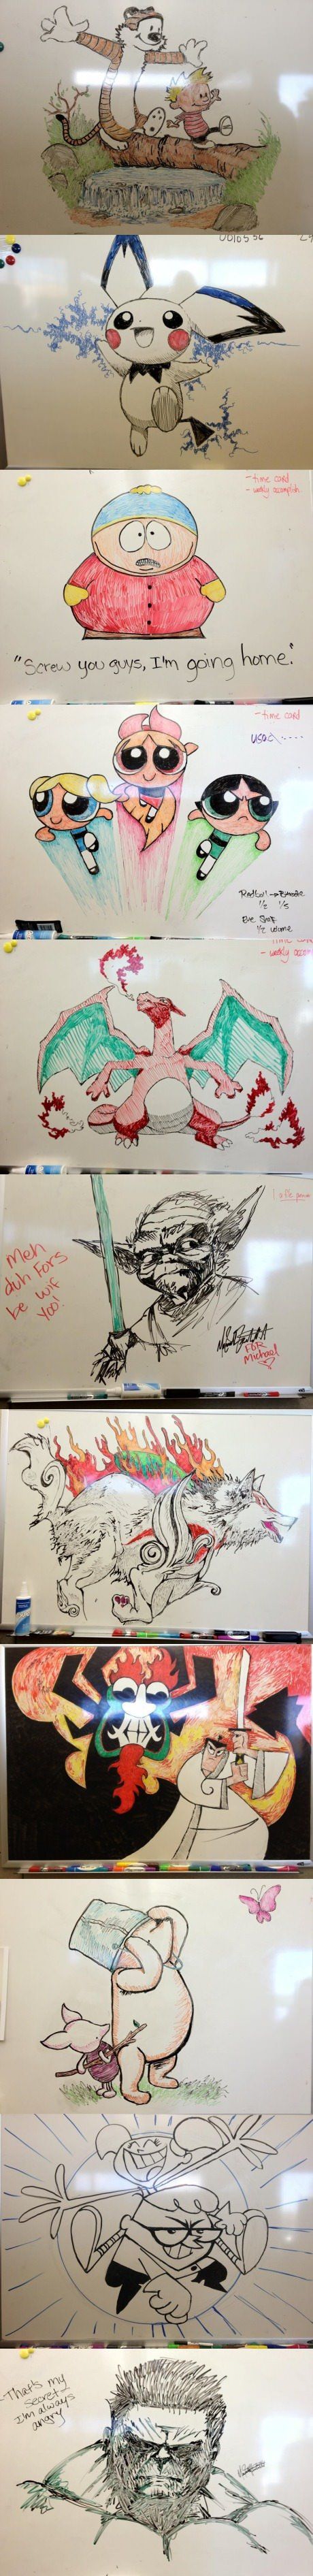 Awesome whiteboard drawings.